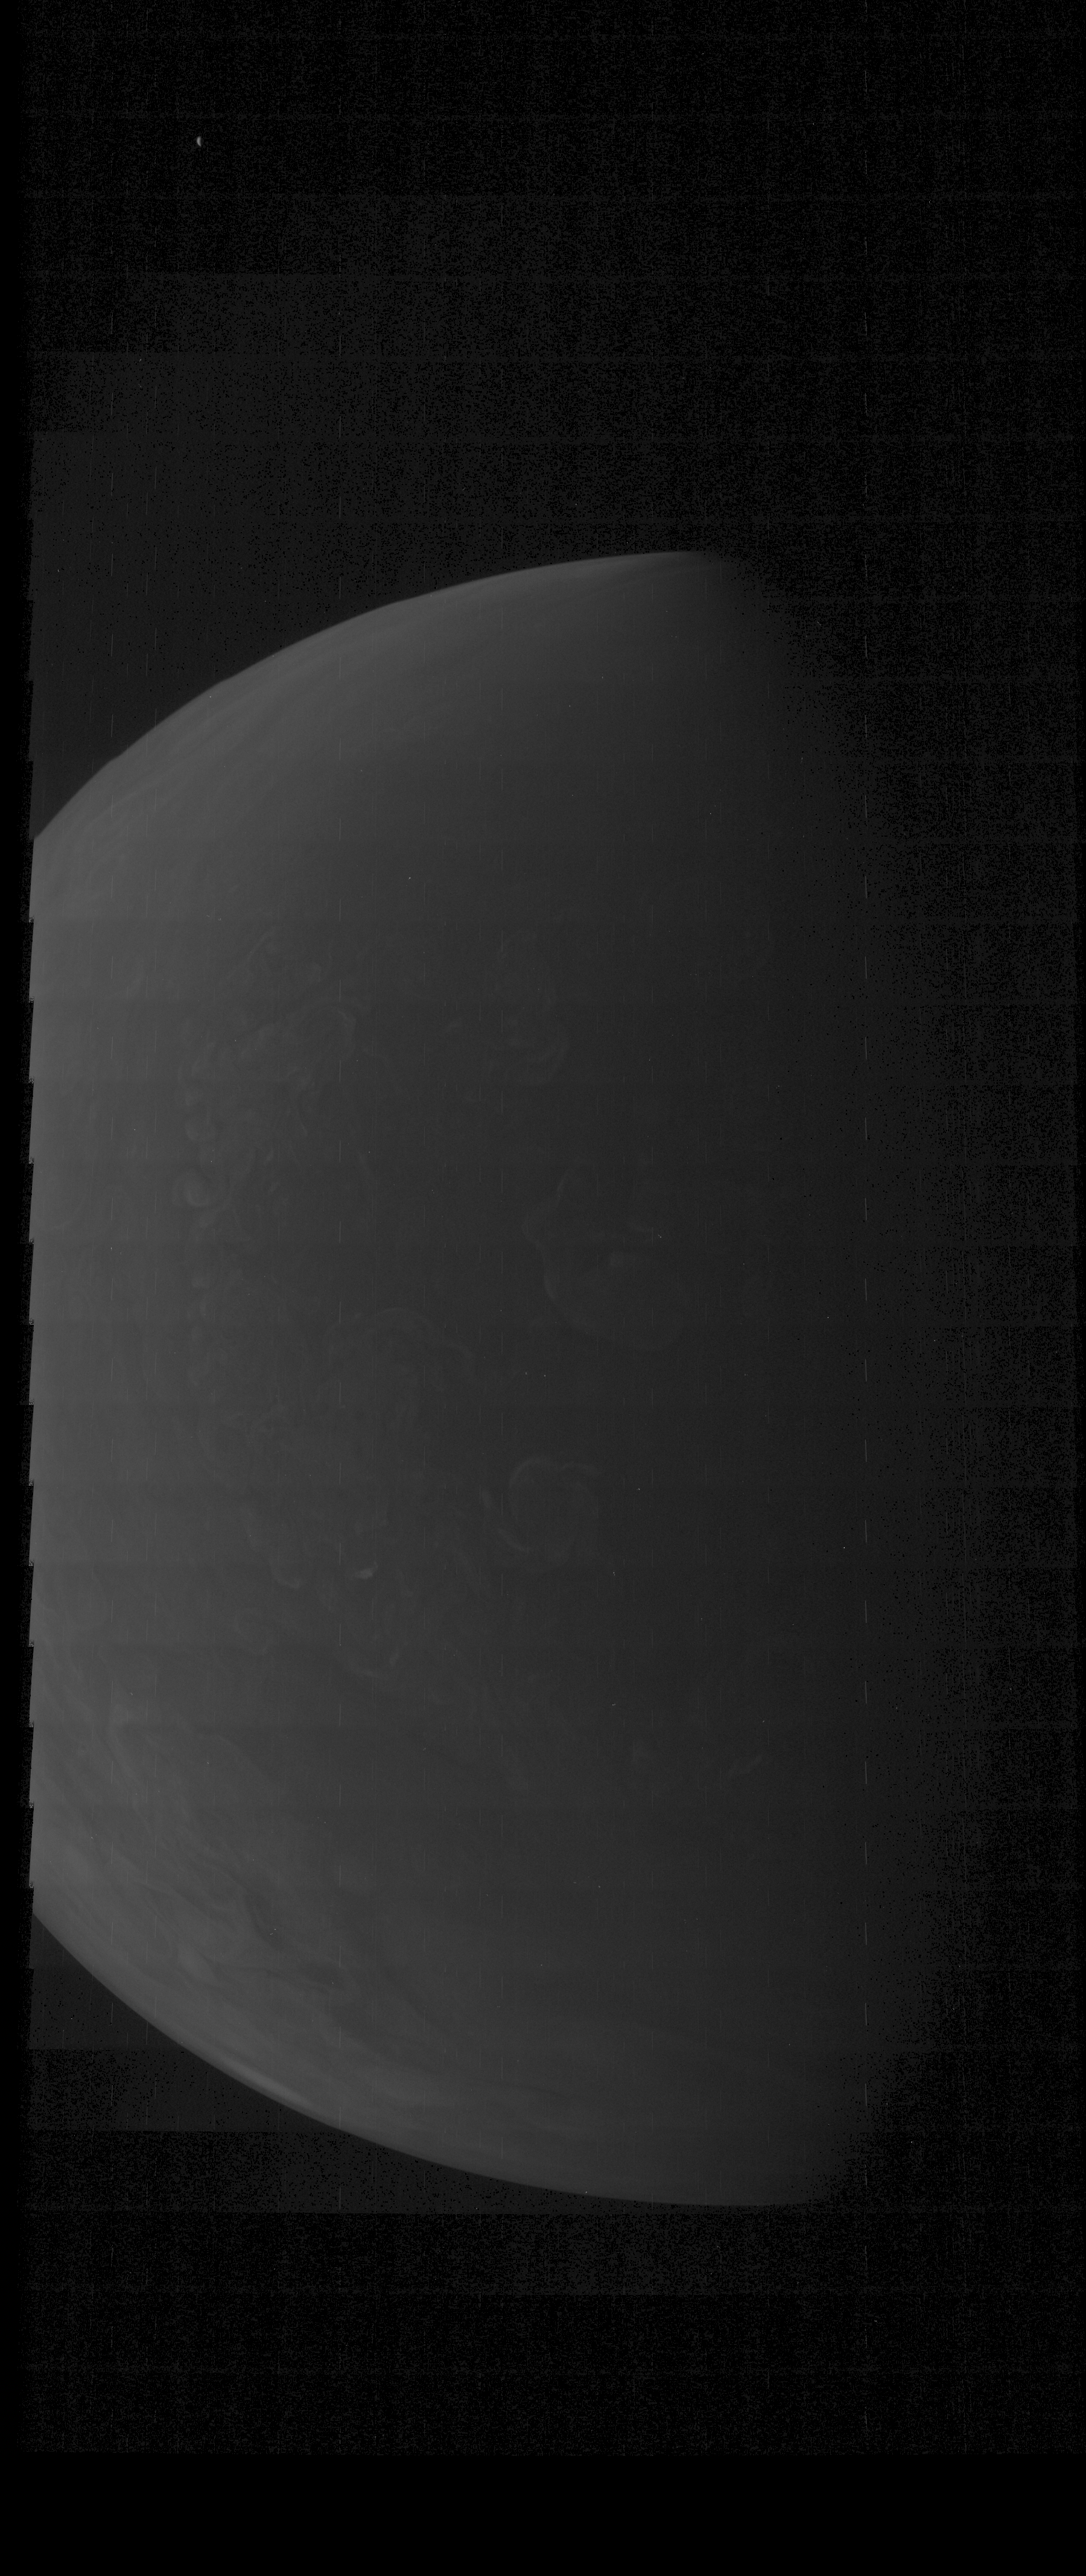 JNCE_2020365_31M00011_V01-raw_proc_hollow_sphere_m_pj_out.BMP_thumbnail_.png